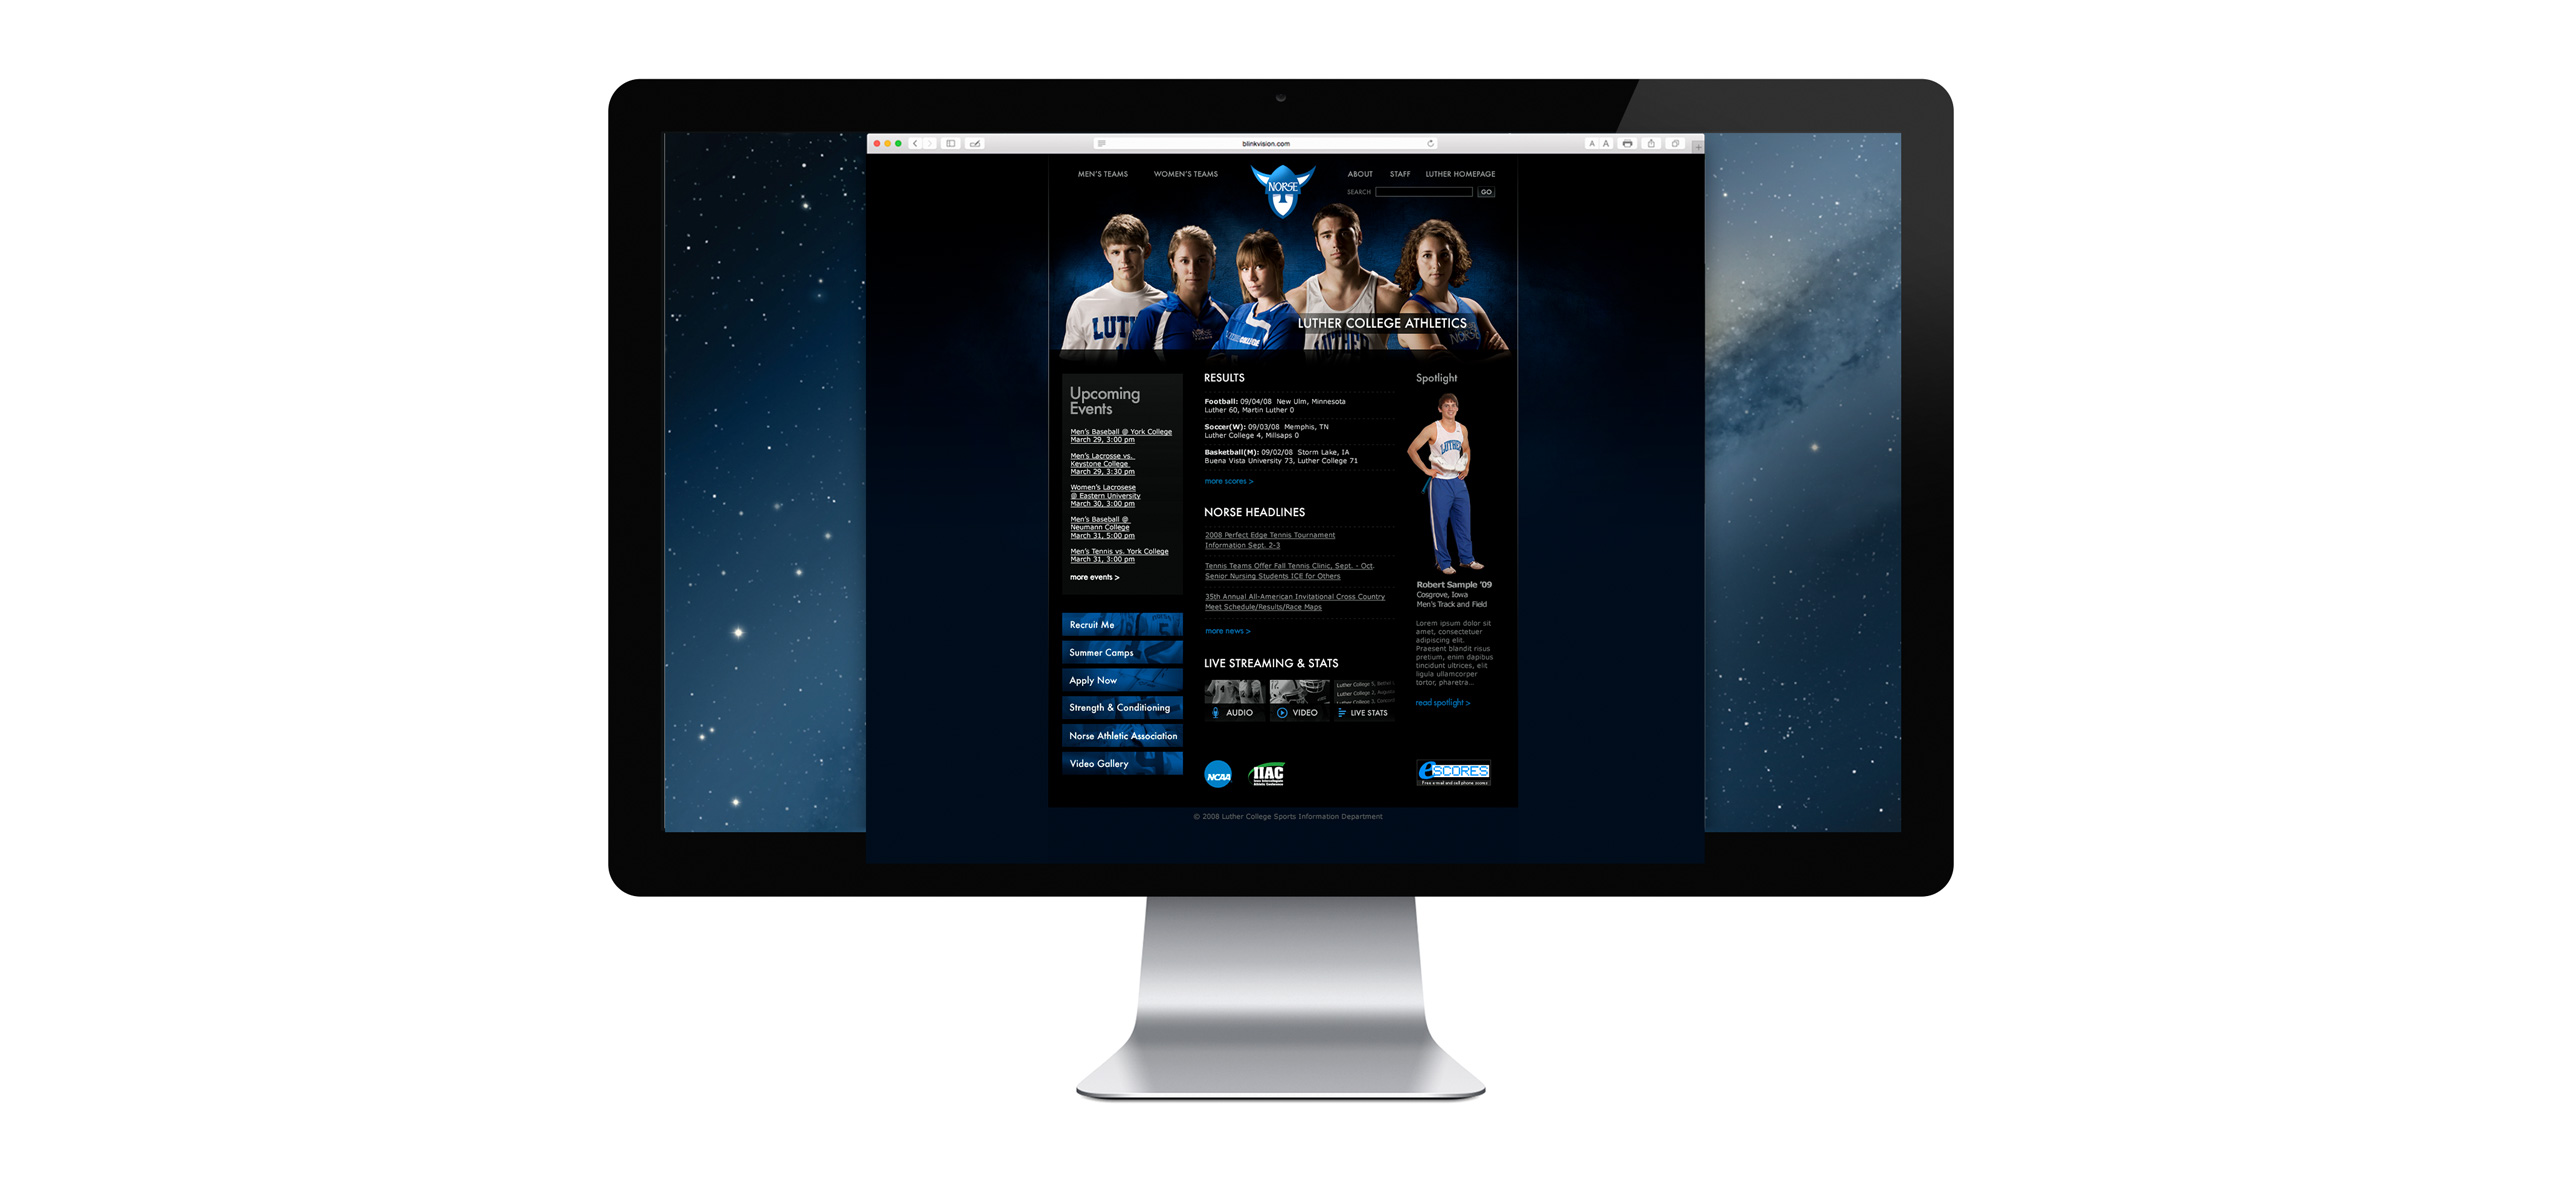 Luther College athletics website